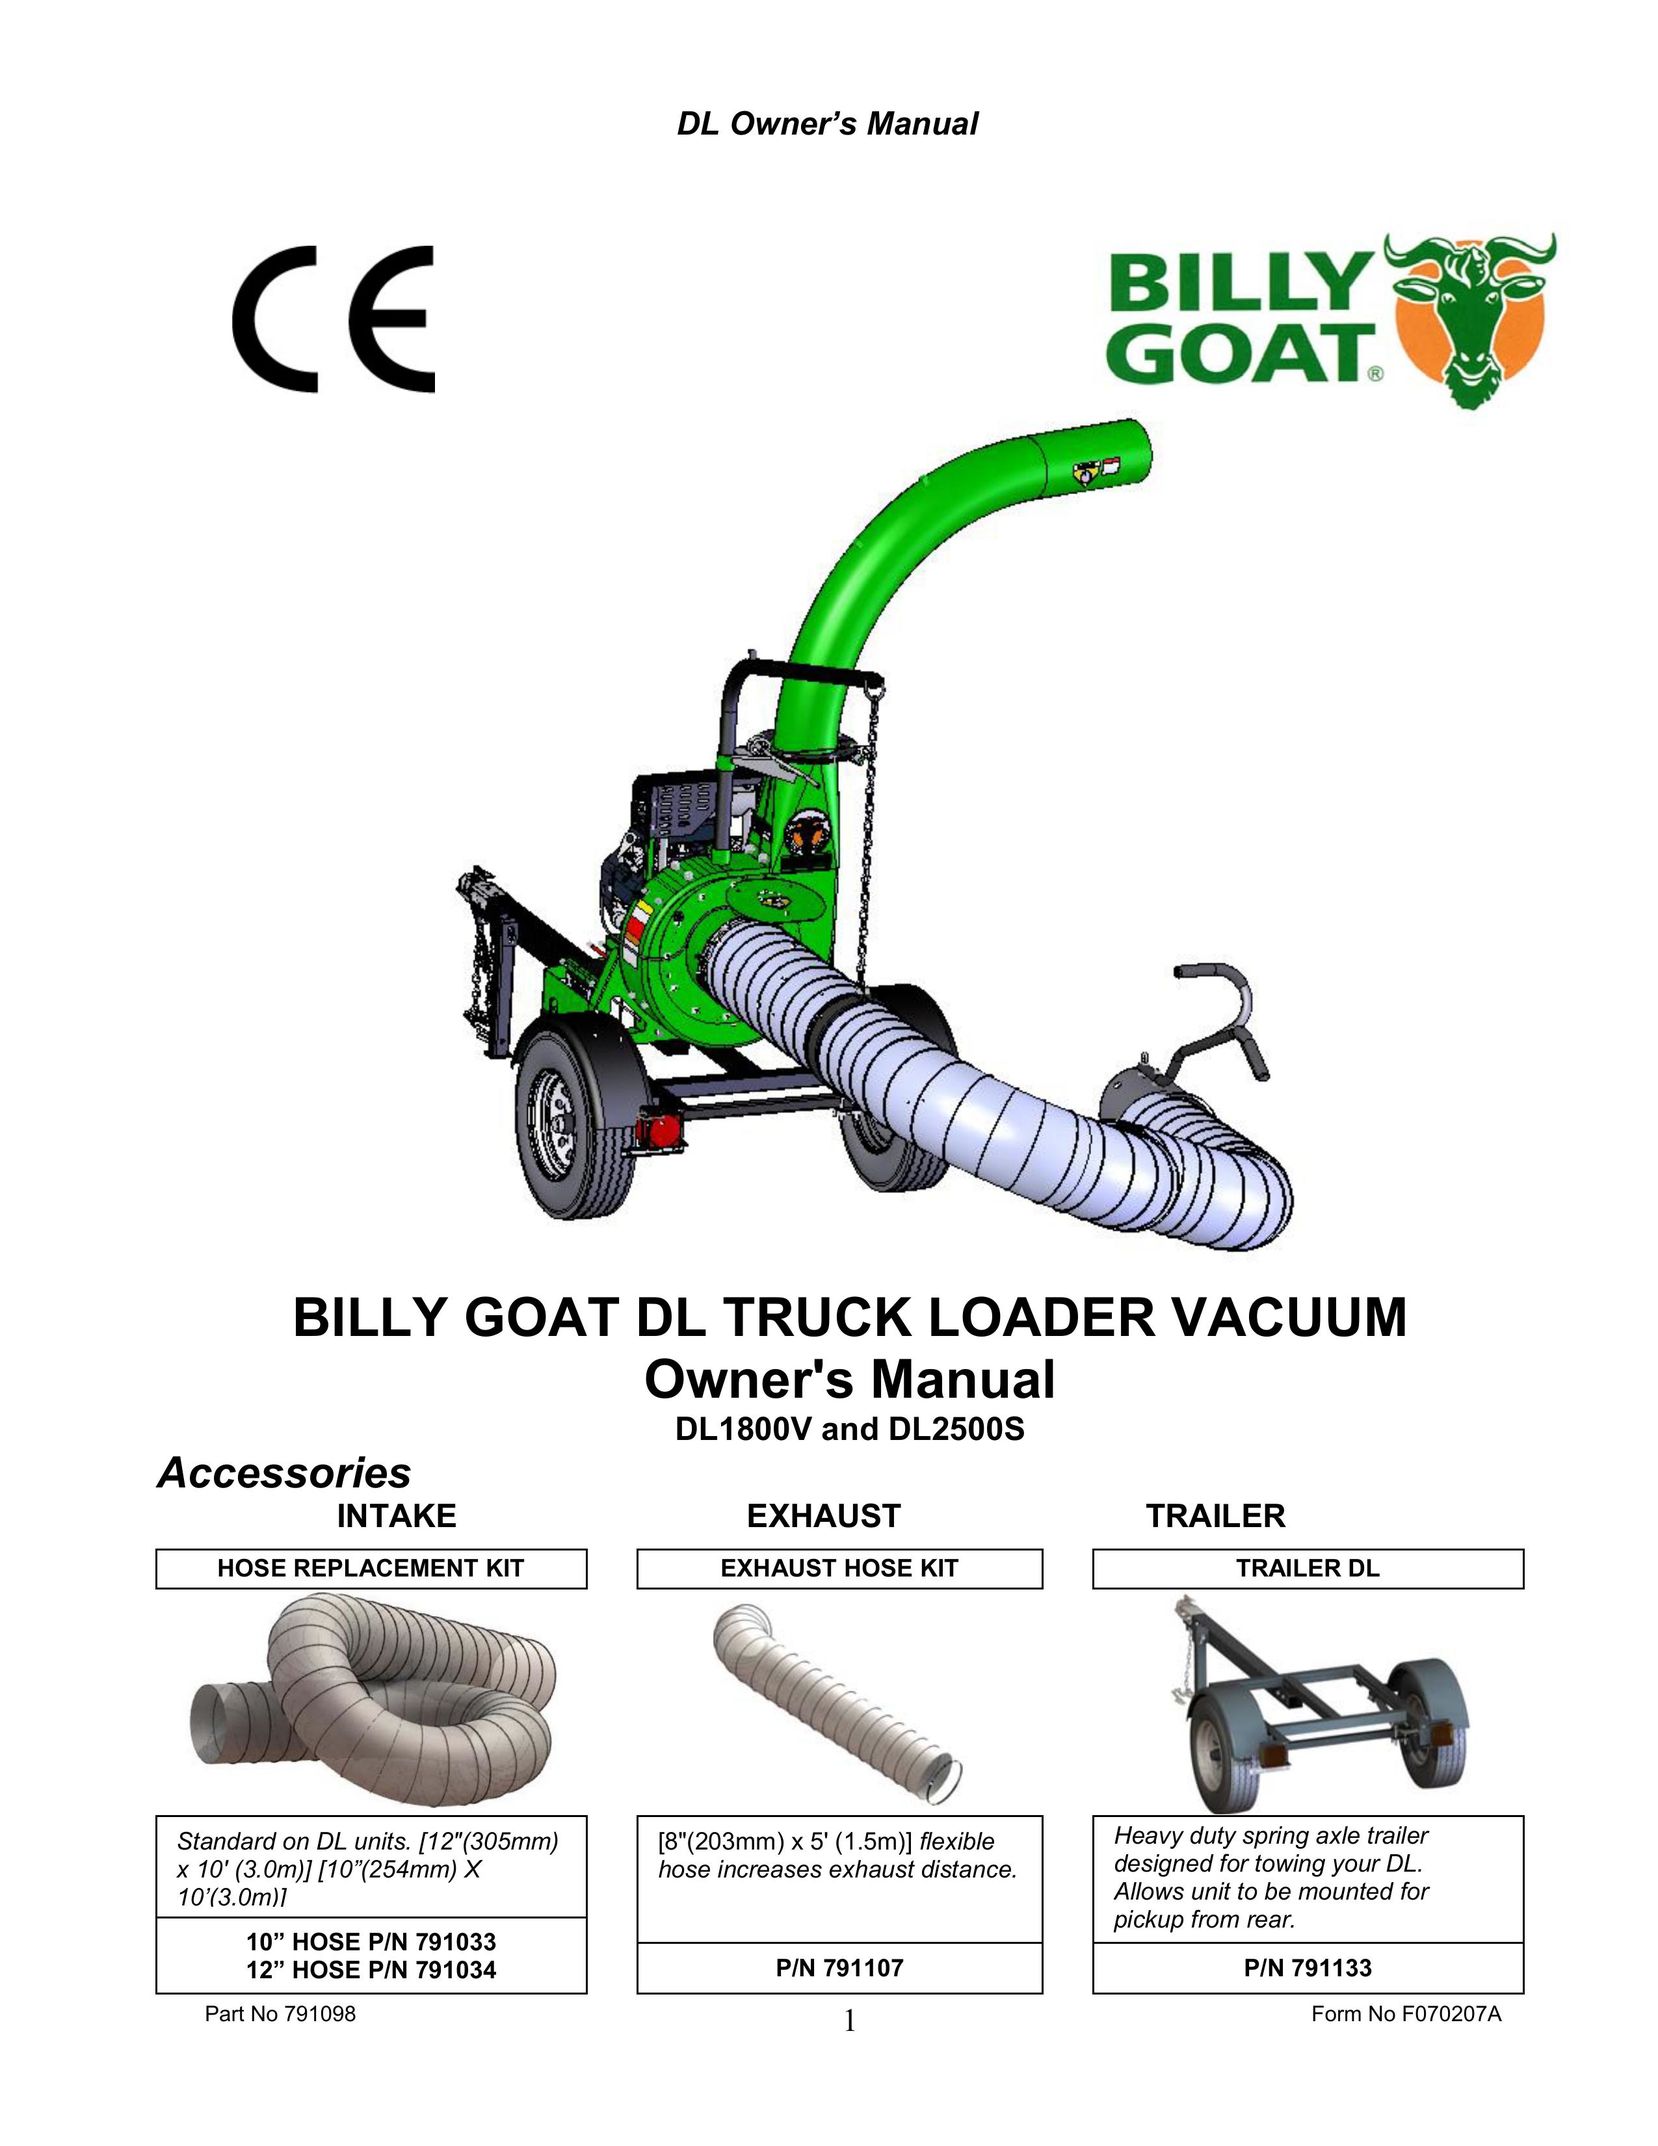 Billy Goat DL2500S Vacuum Cleaner User Manual